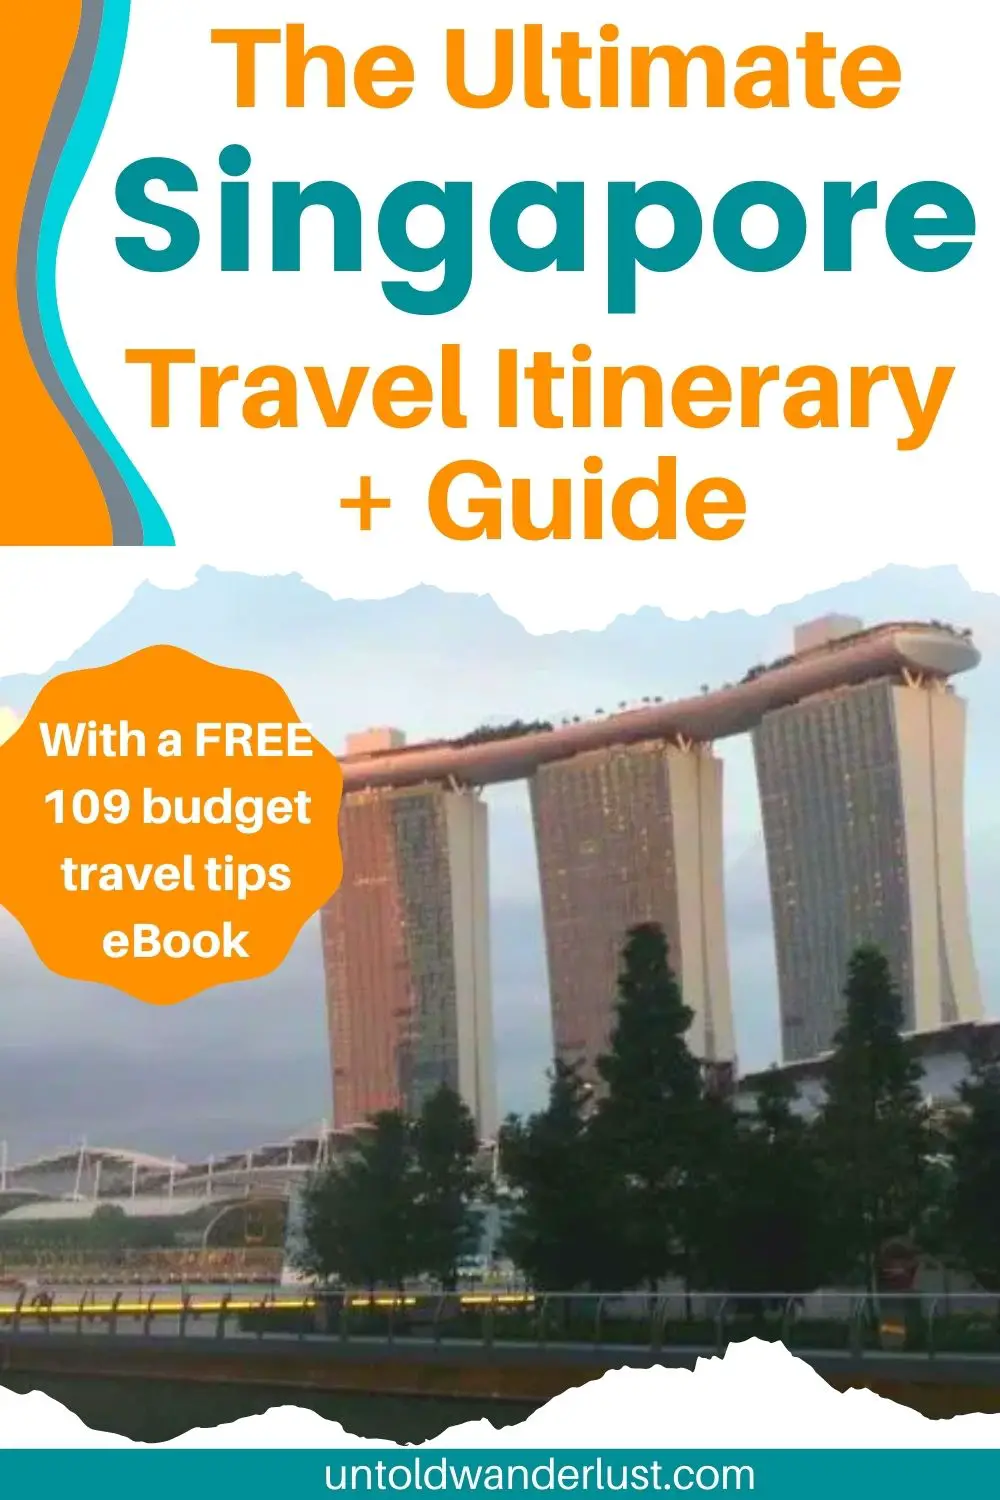 The Ultimate Singapore Travel Itinerary + Guide